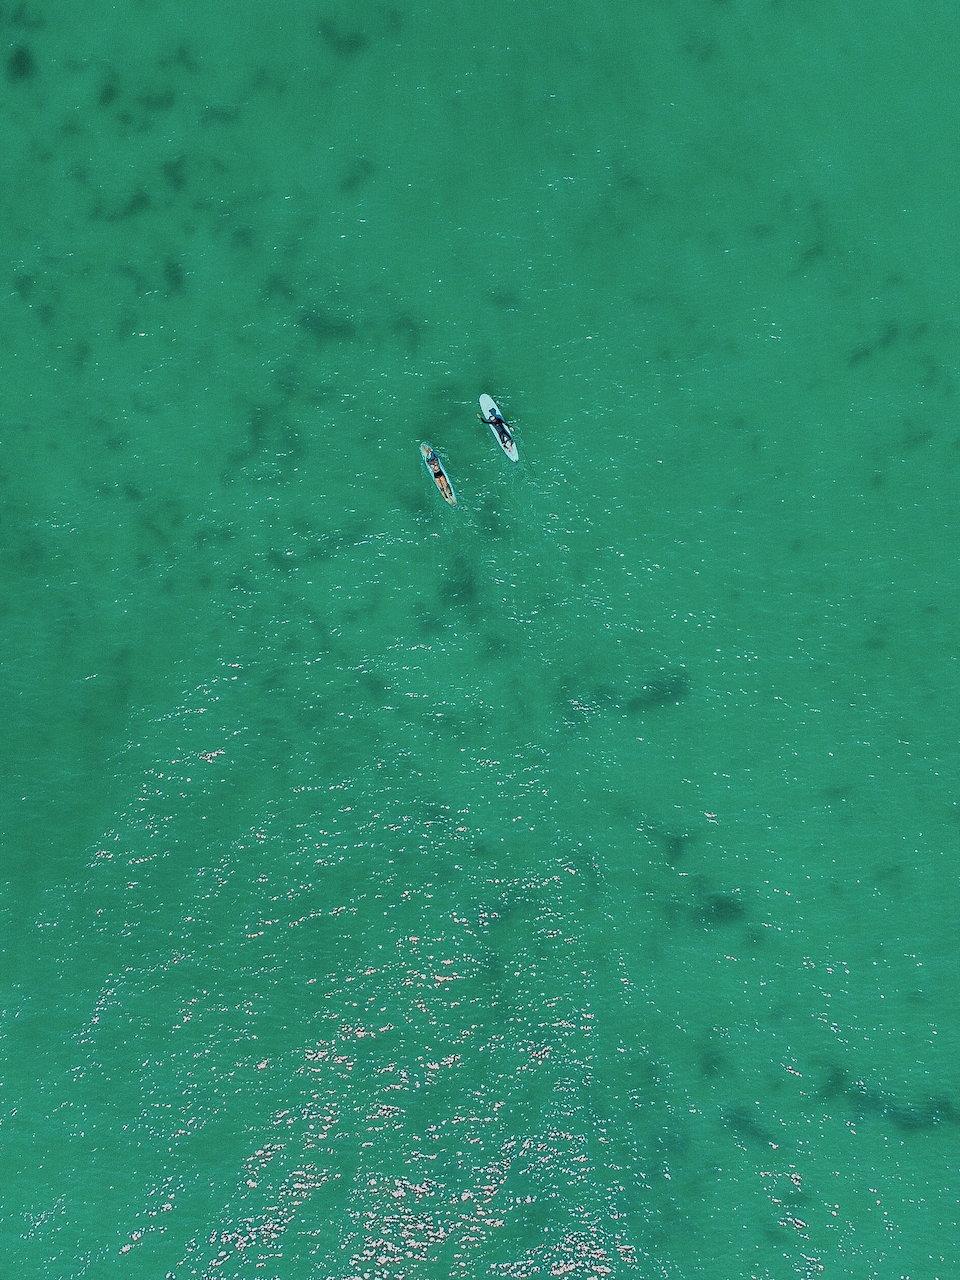 Two surfers waiting for a wave at the pass - Aerial View - Drone Shot - Byron Bay - New South Wales - Australia